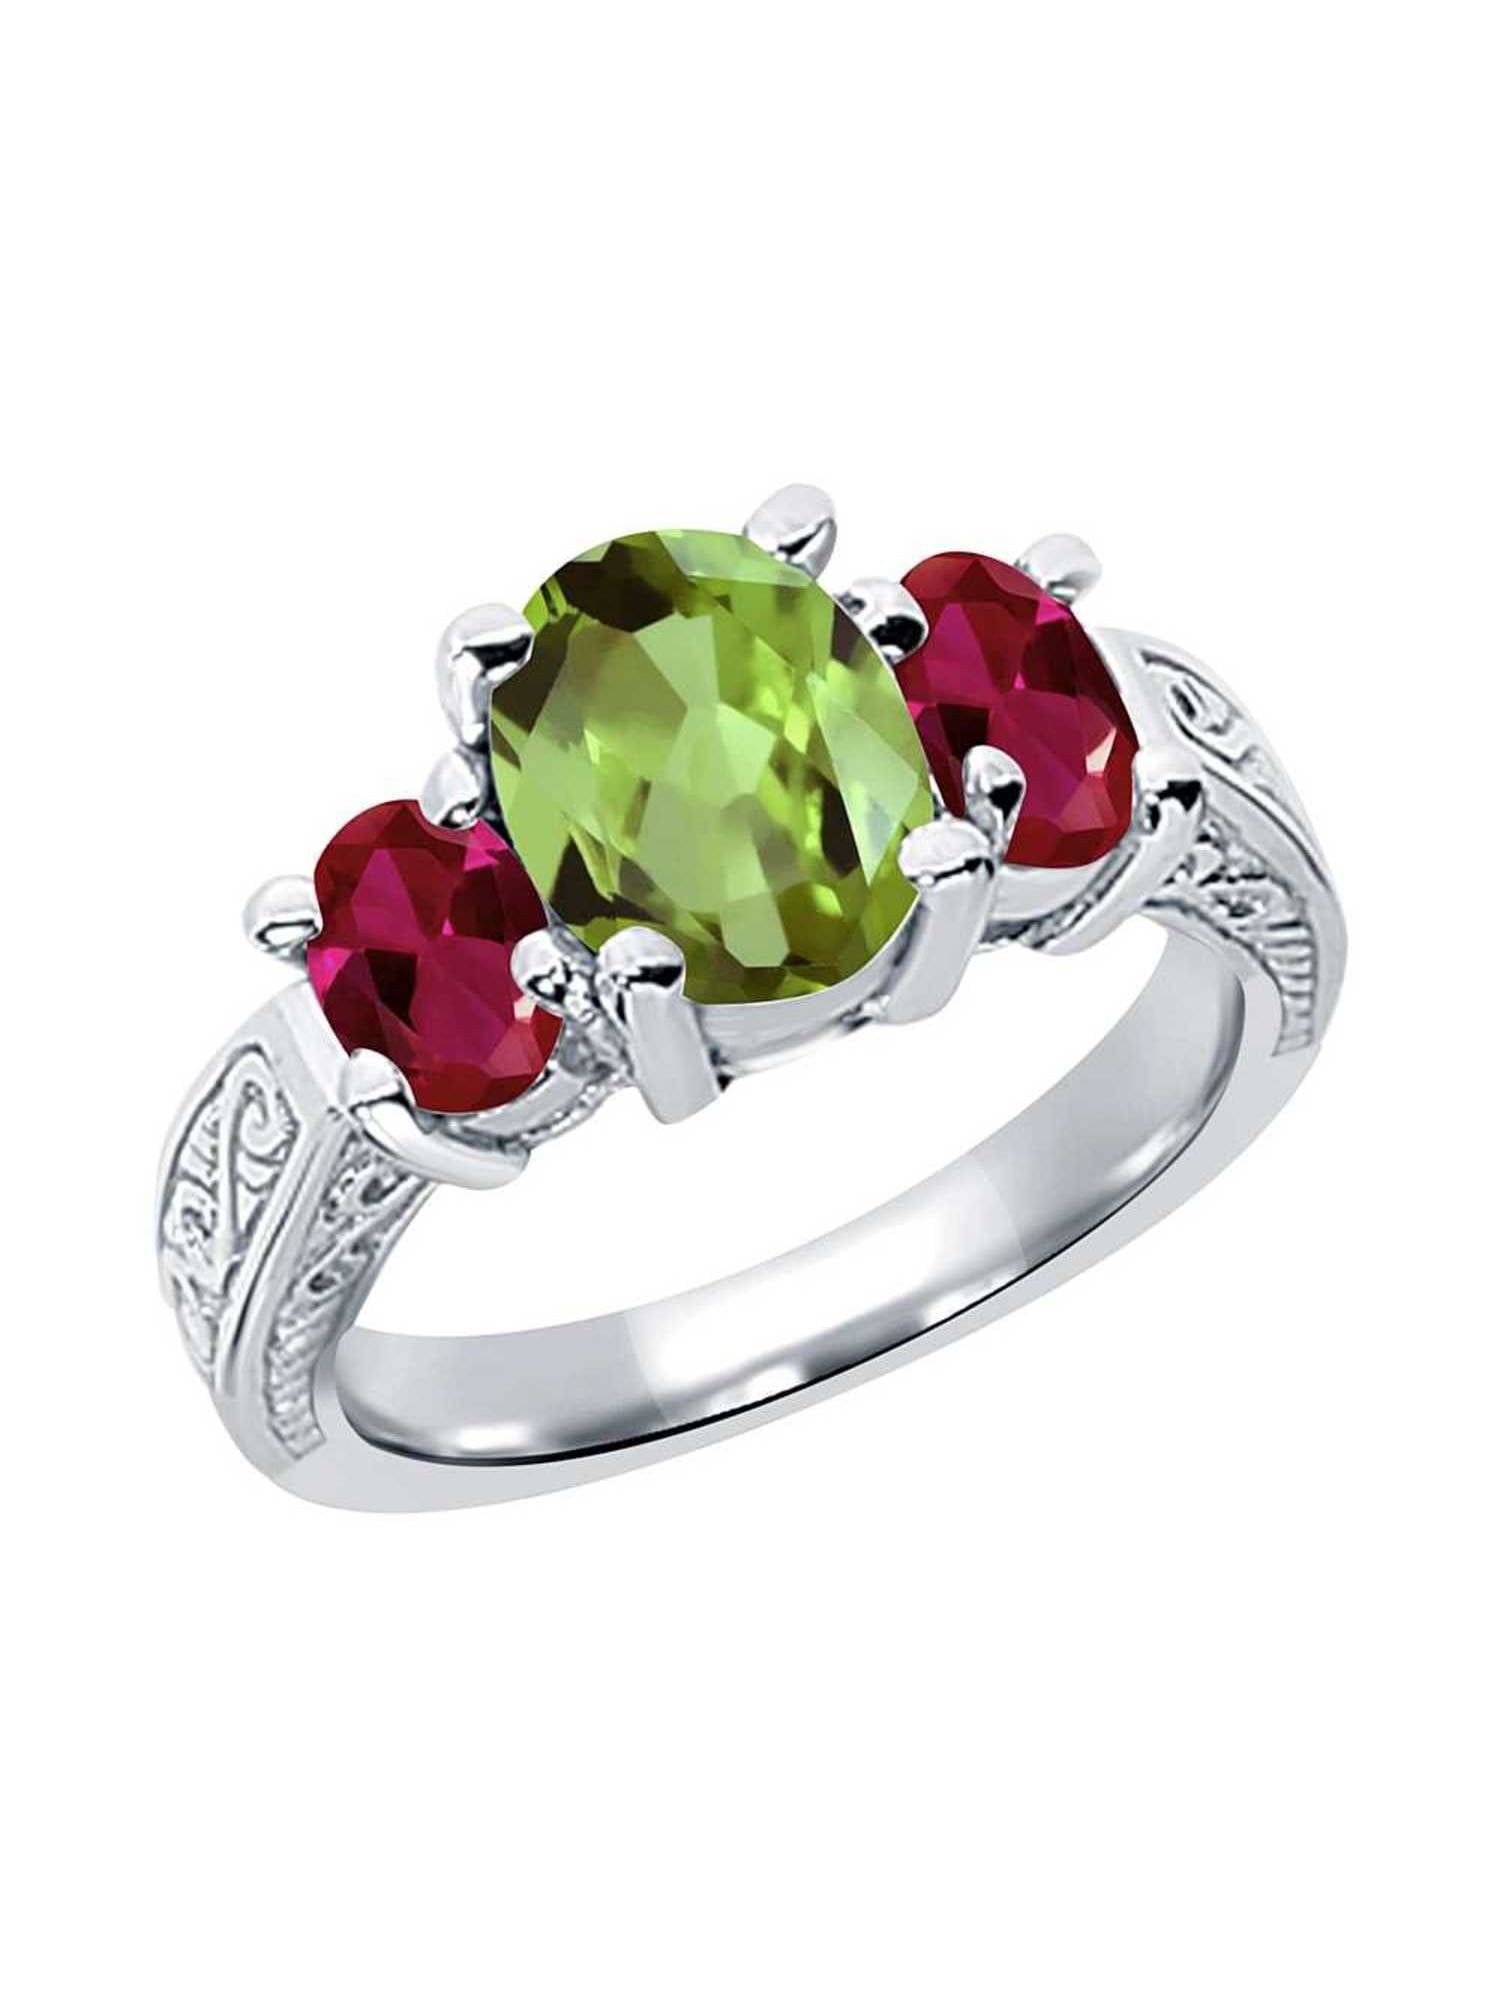 3.5 Ct Peridot & Ruby Oval Ring .925 Sterling Silver 